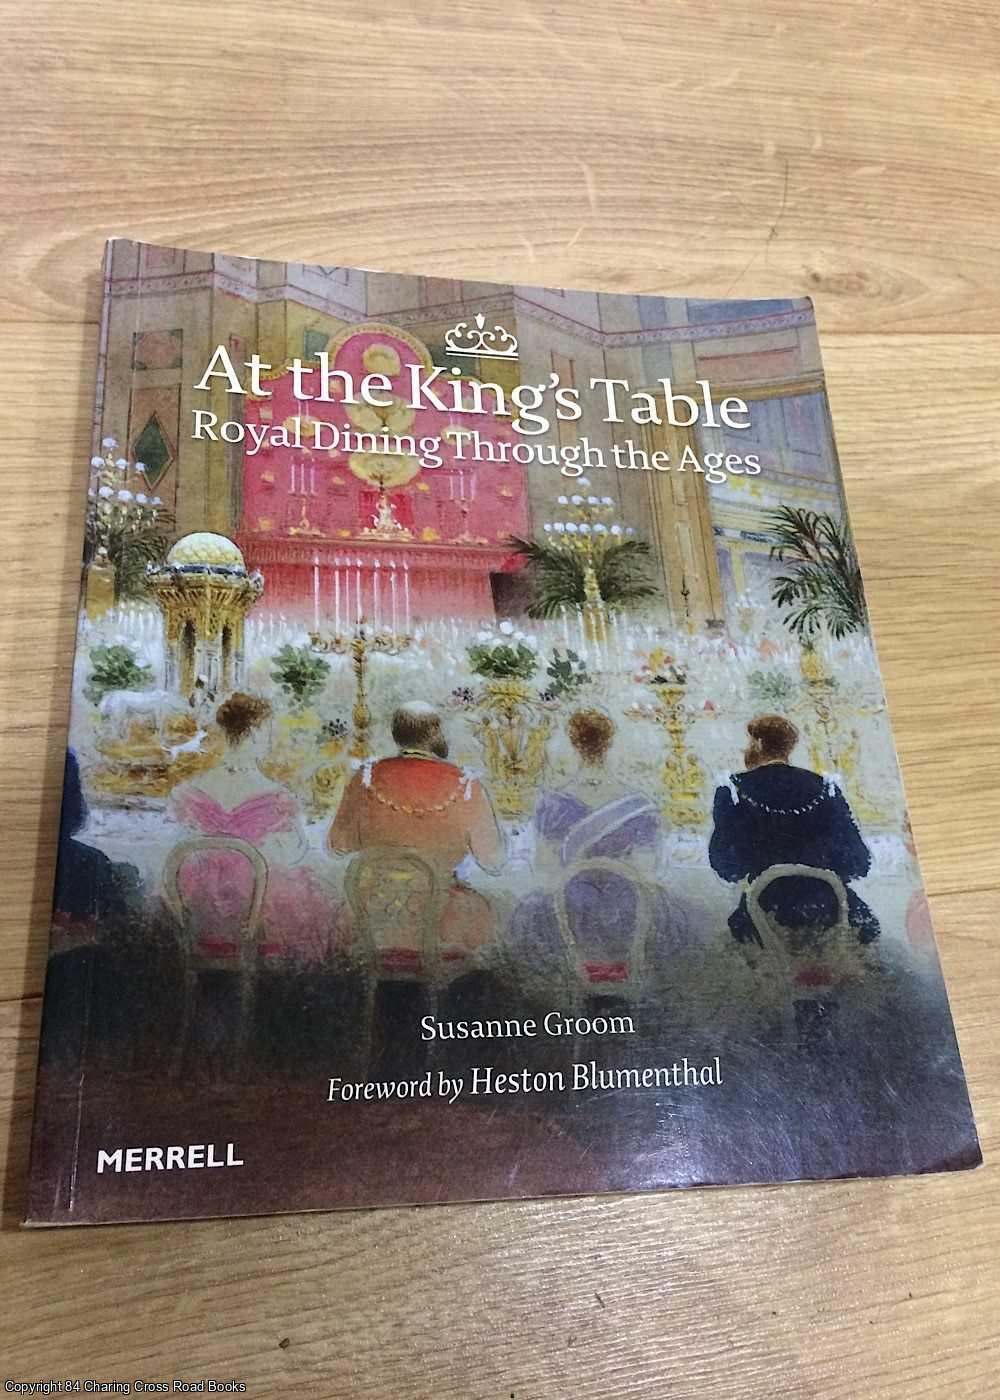 Susanne Groom, Heston Blumenthal - At the King's Table: Royal Dining Through the Ages